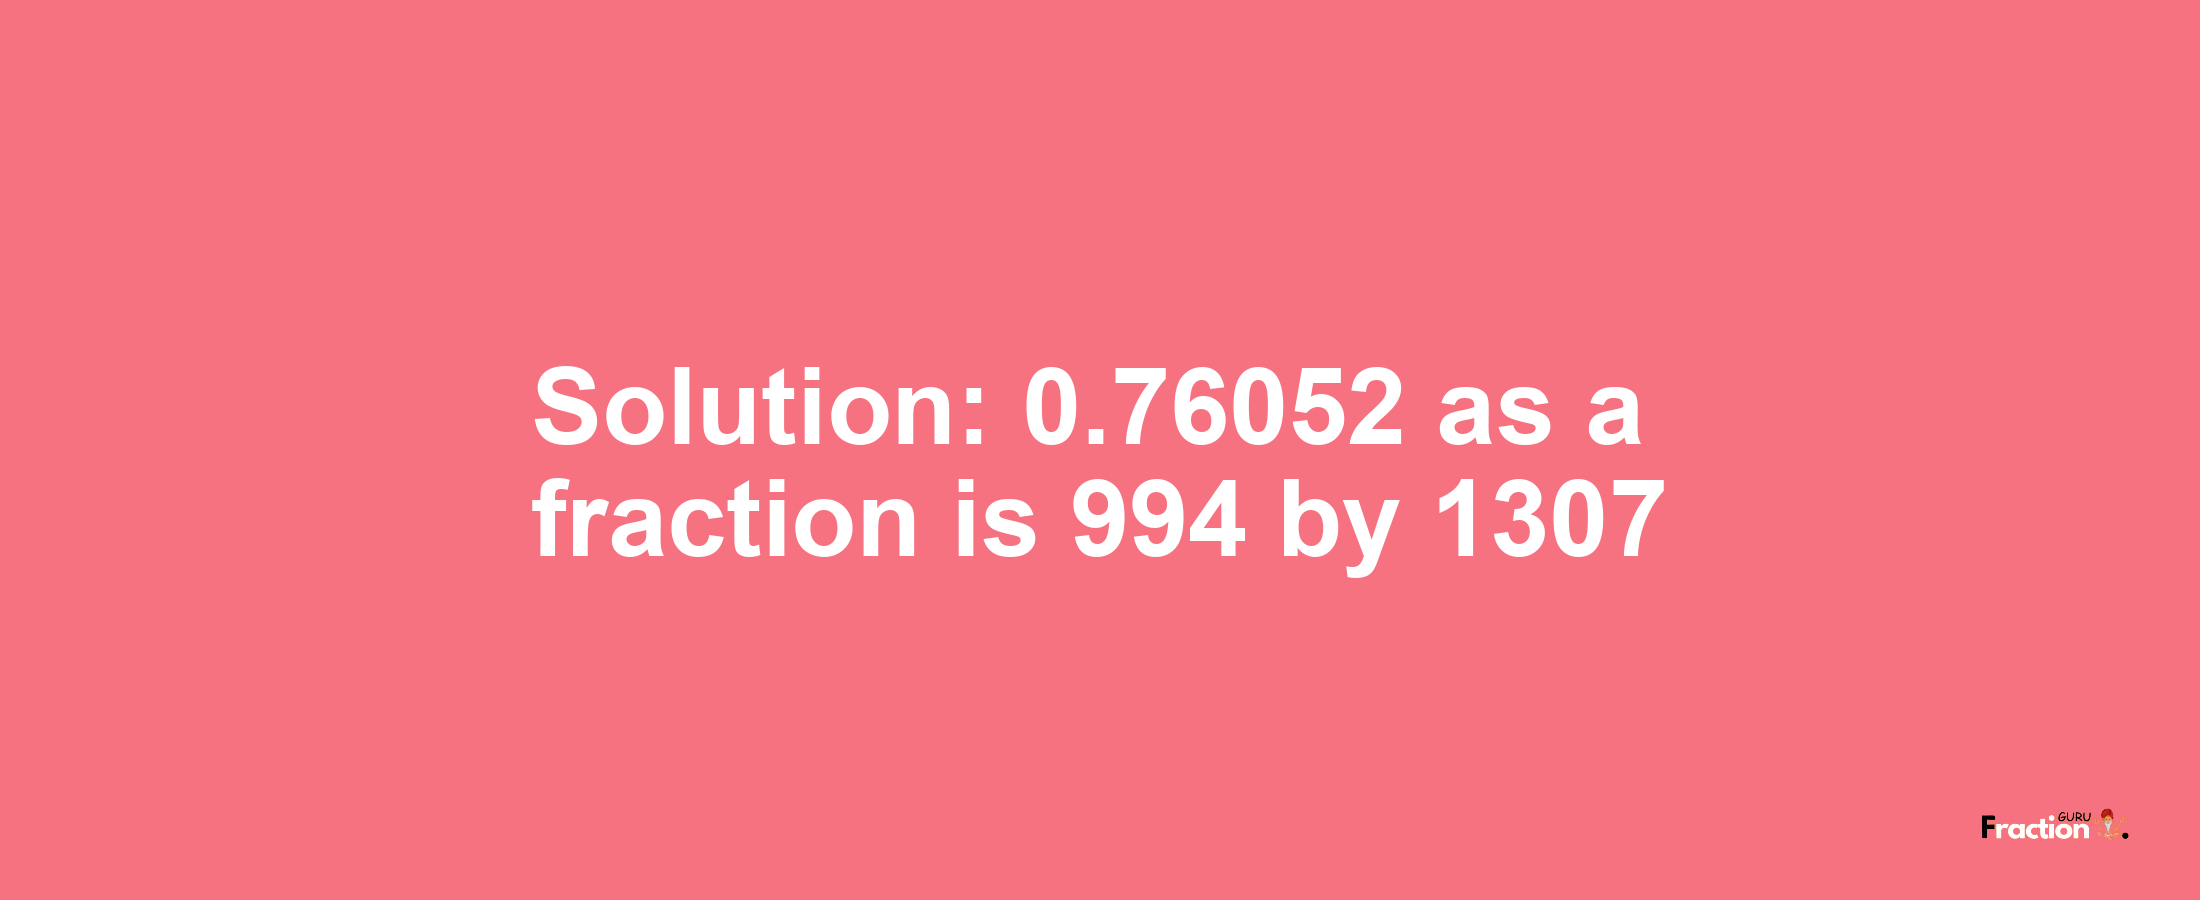 Solution:0.76052 as a fraction is 994/1307